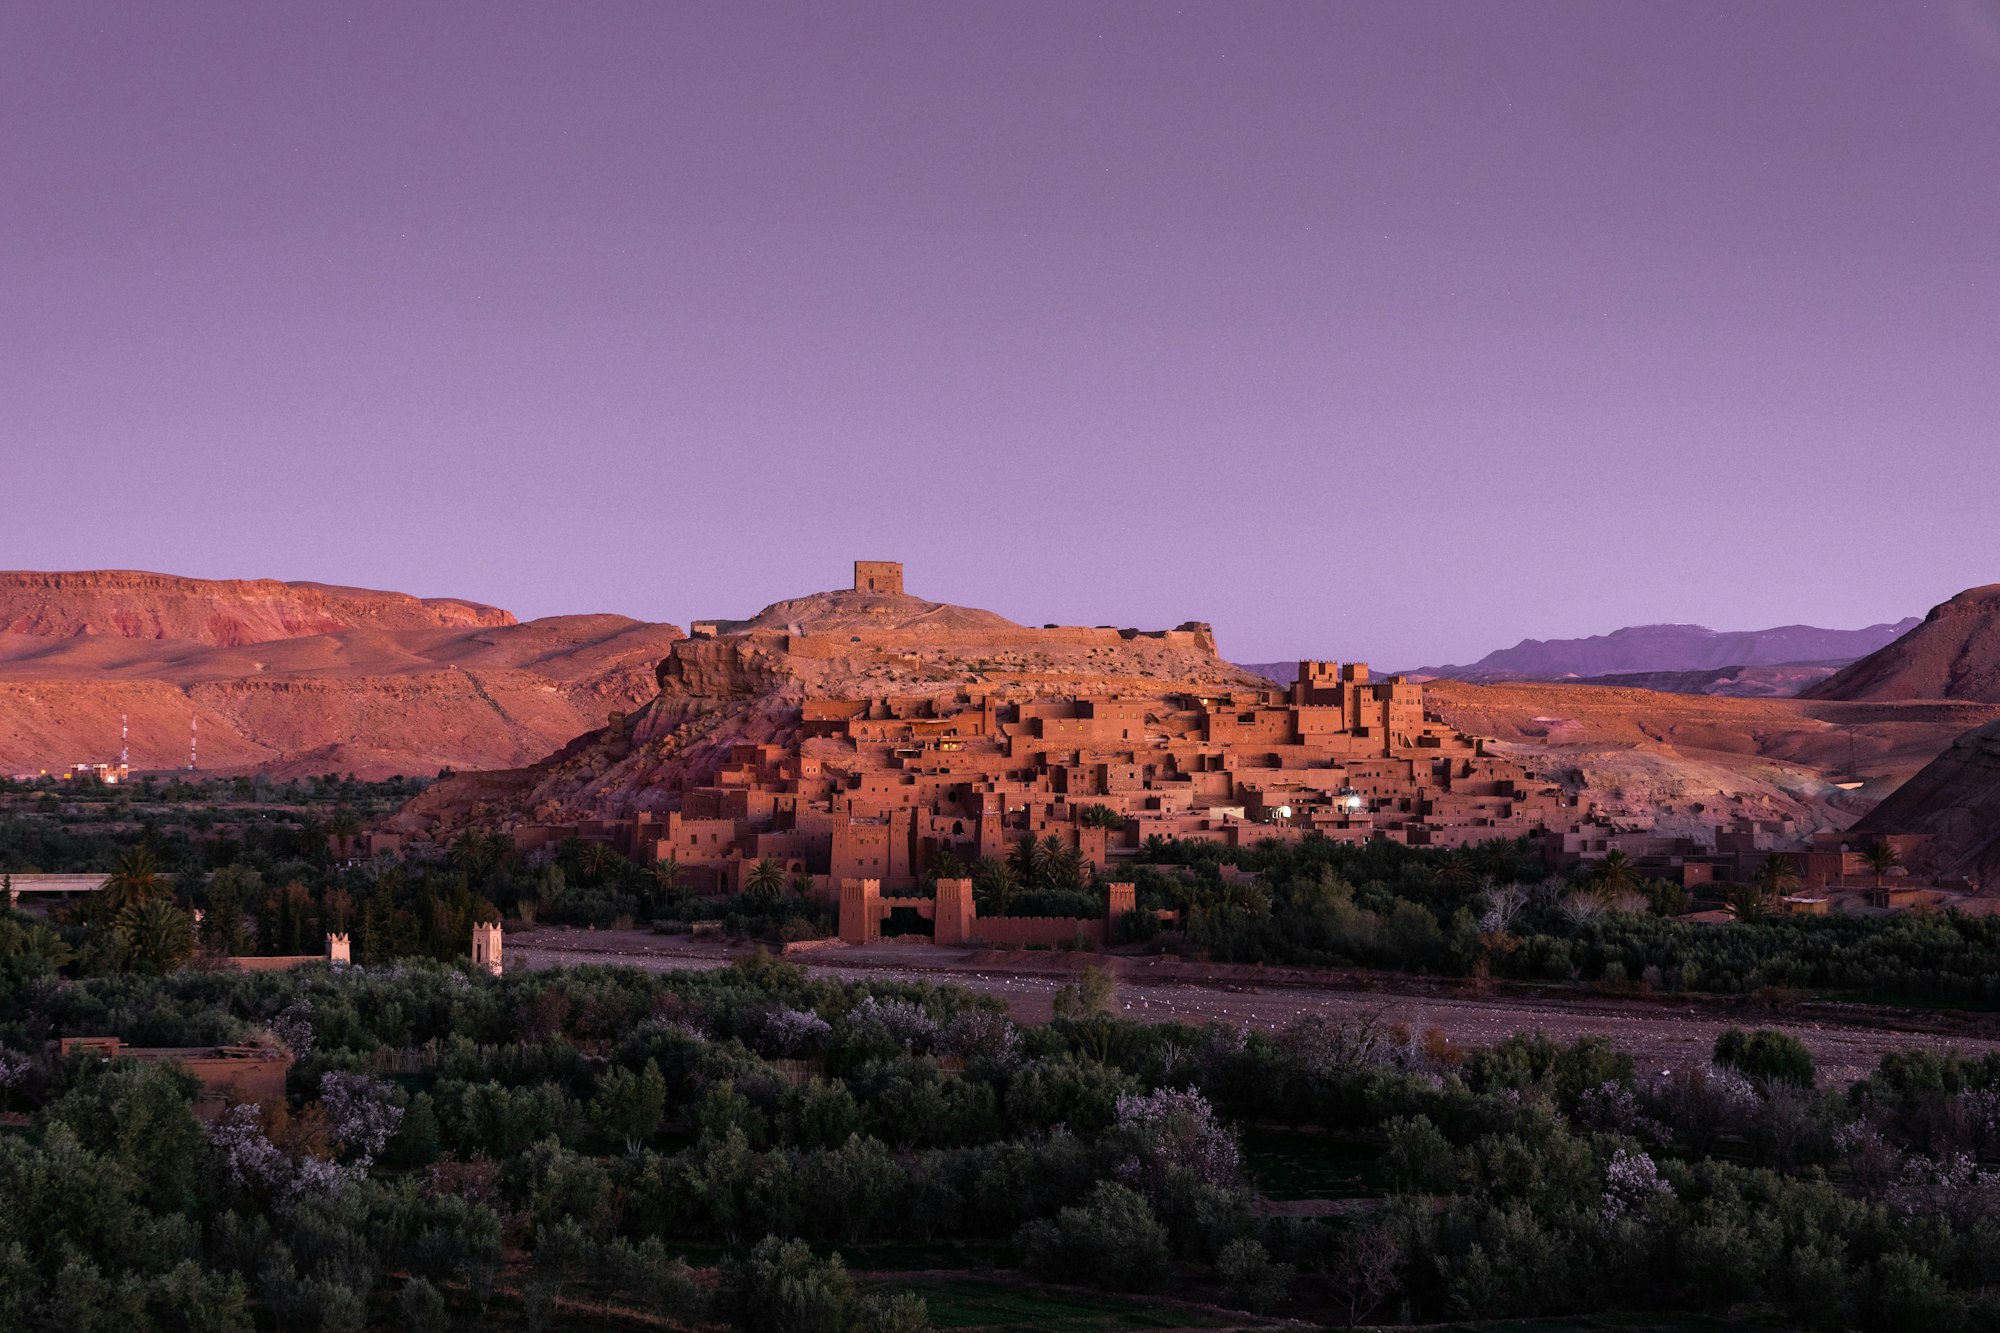 Ait Benhaddou, a historic fortified village in Morocco